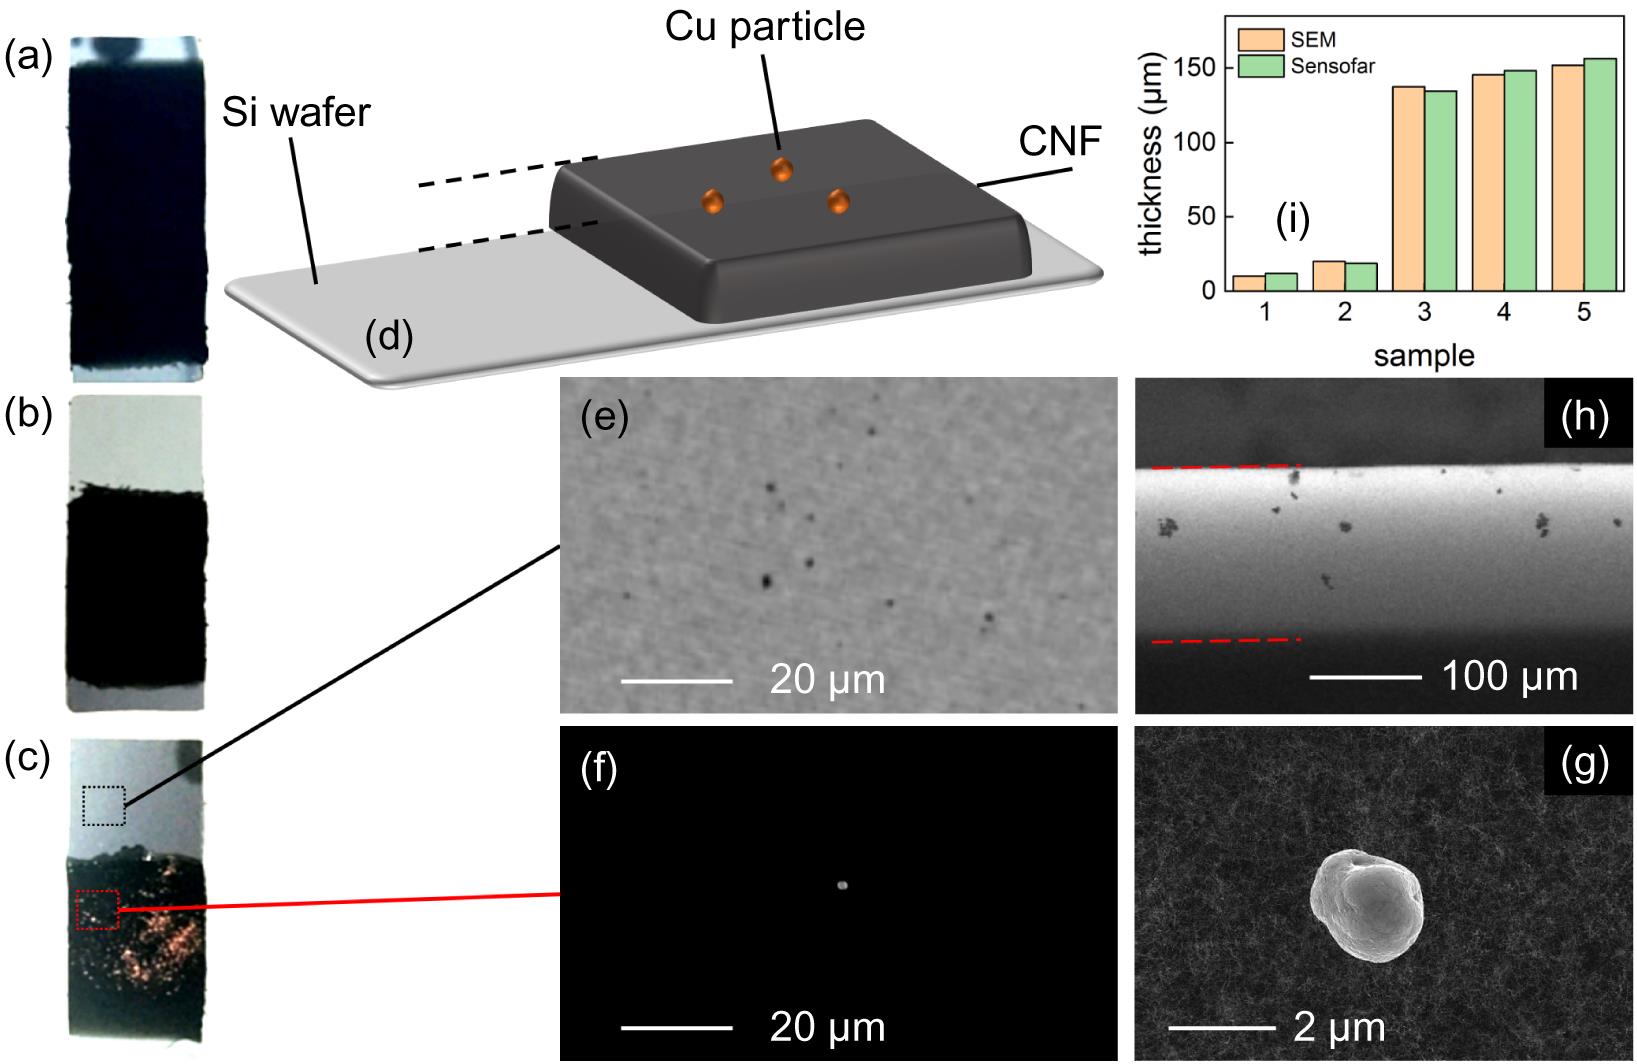 (a) An as-prepared testing CNF target. (b) Part of the testing CNF target having been wiped off. (c) The testing target where the Cu powder has been sprinkled on the upper surface. (d) Schematic diagram of the thickness measurement method of CNFs. Image of the morphology of the surface of (e) the Si wafer and (f) the CNF under confocal microscopy. (g) SEM image of a Cu particle on the surface of CNF. (h) SEM image of the cross section of a CNF with thickness of 152 ; the red dashed lines indicate the boundaries of CNF. (i) Comparison between measurements from SEM (yellow bars) and confocal microscope (green bars).